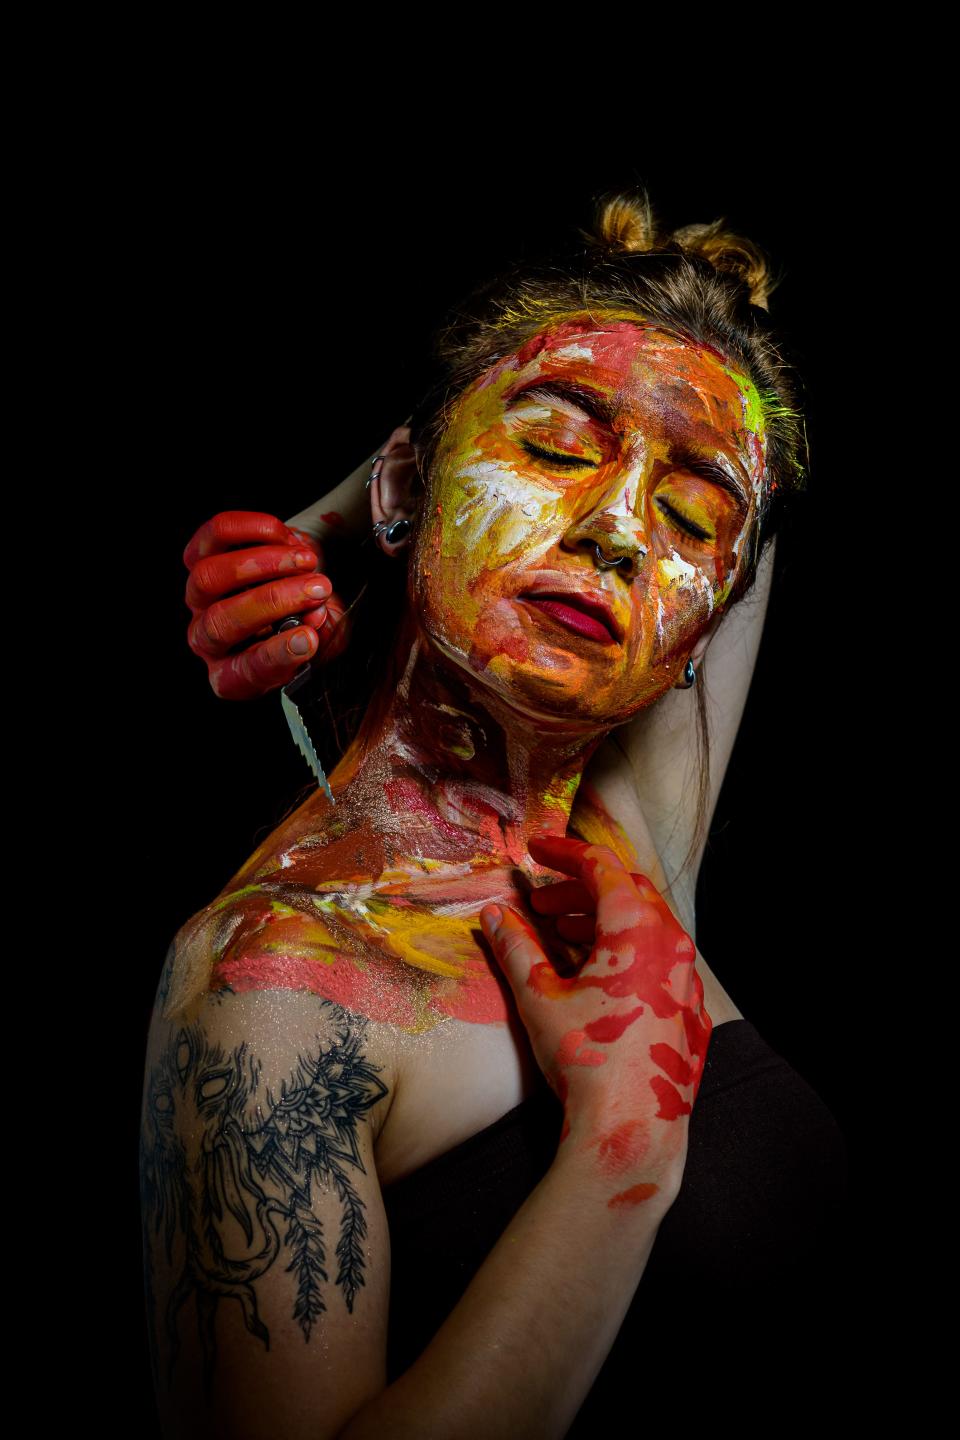 Heidi Fawver is shown covered with paint in a portrait created by Stark County photographer David Dingwell. Dingwell will present this piece and other portraits as part of the "Coalescence" exhibition with fellow artist Melissa Goff on Friday at Patina Arts Centre in downtown Canton.